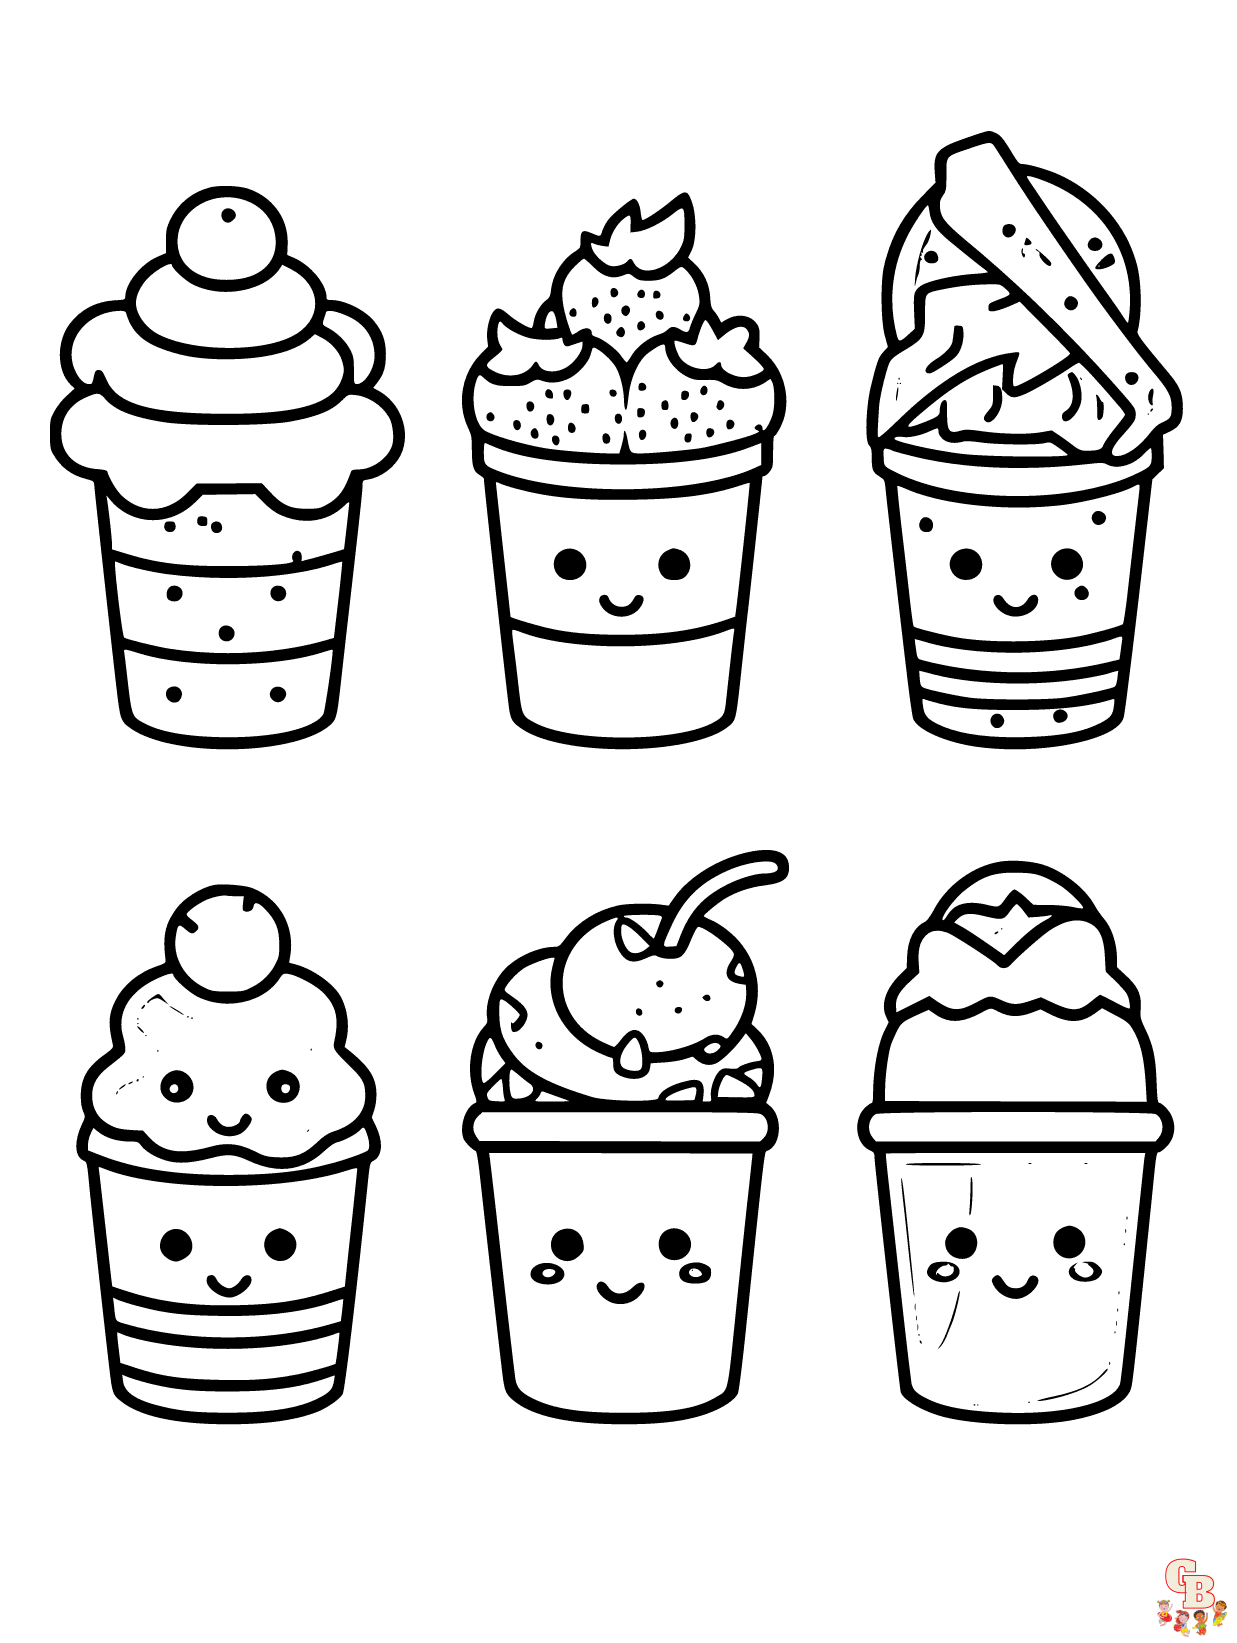 dessert coloring pages